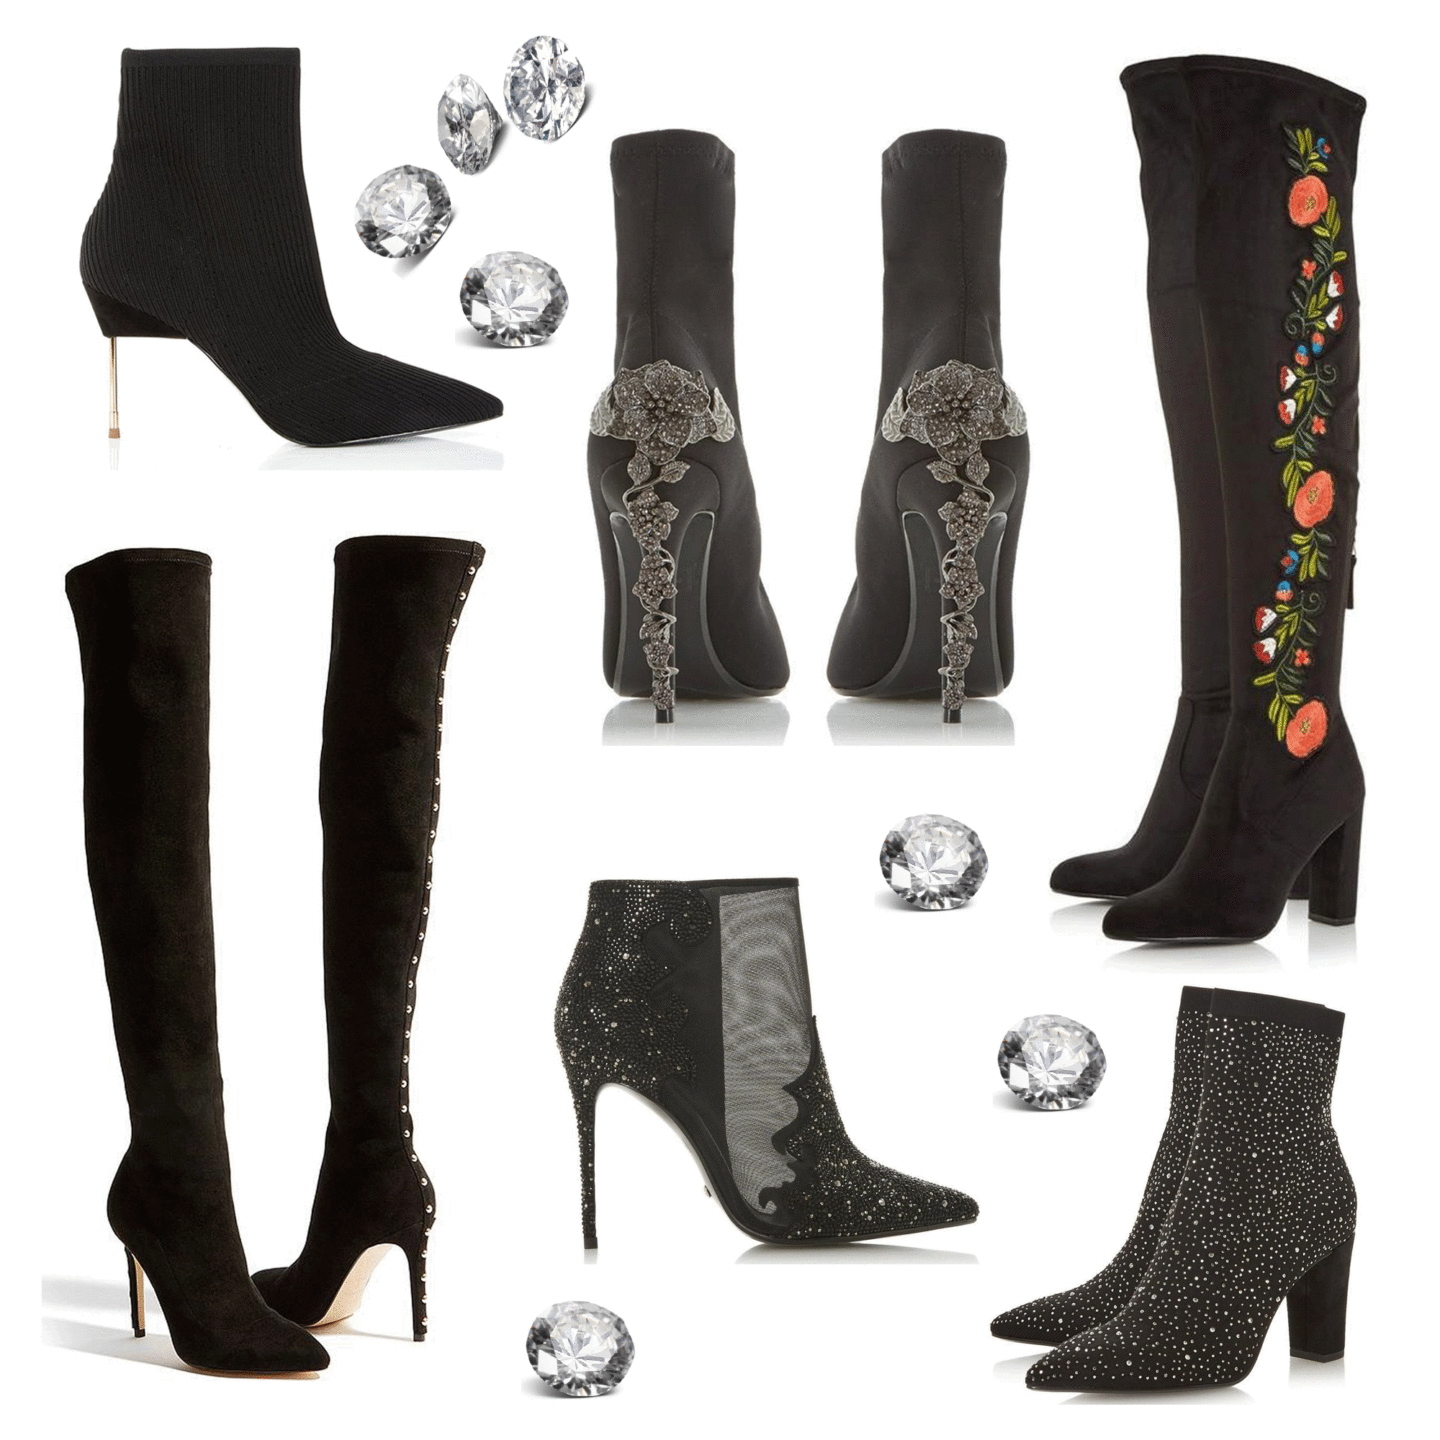 Boots Diamante Trim Mesh Stiletto Heel Ankle Boot Poison Ivy Embellished Sock Heeled Boots Ozone Diamante Pointed Toe Stretch Knit Boots Envoke Floral Applique Over The Knee Boots Karen Millen Studs Over The Knee Boots KURT GEIGER London Barbican Knitted Stiletto Metal Heeled Sock Boots